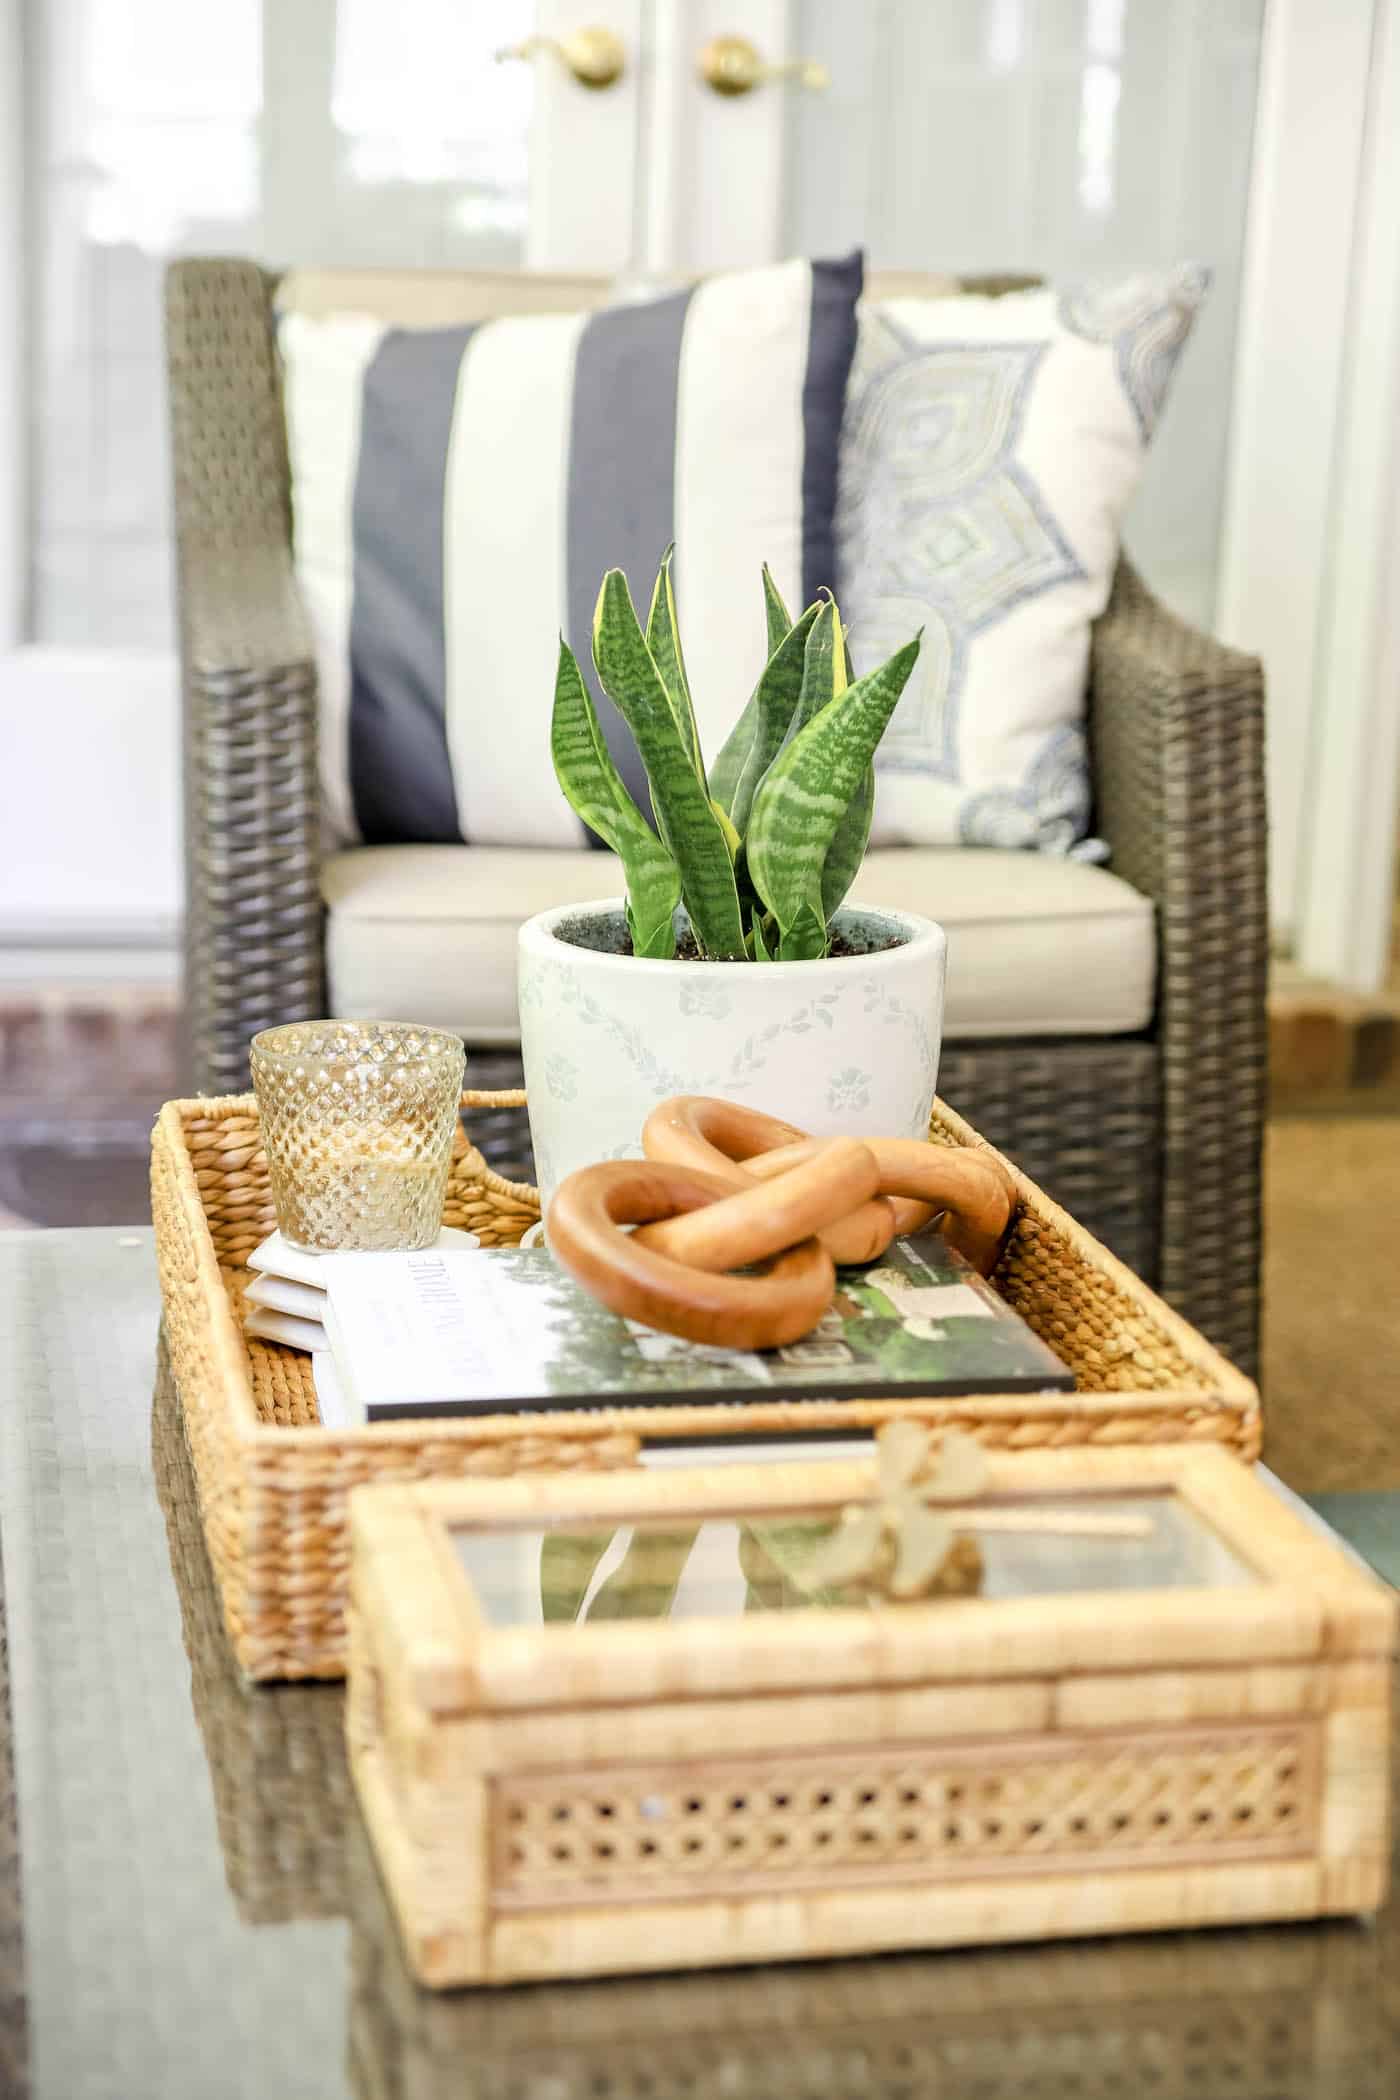 How to Decorate a Coffee Table - The Turquoise Home